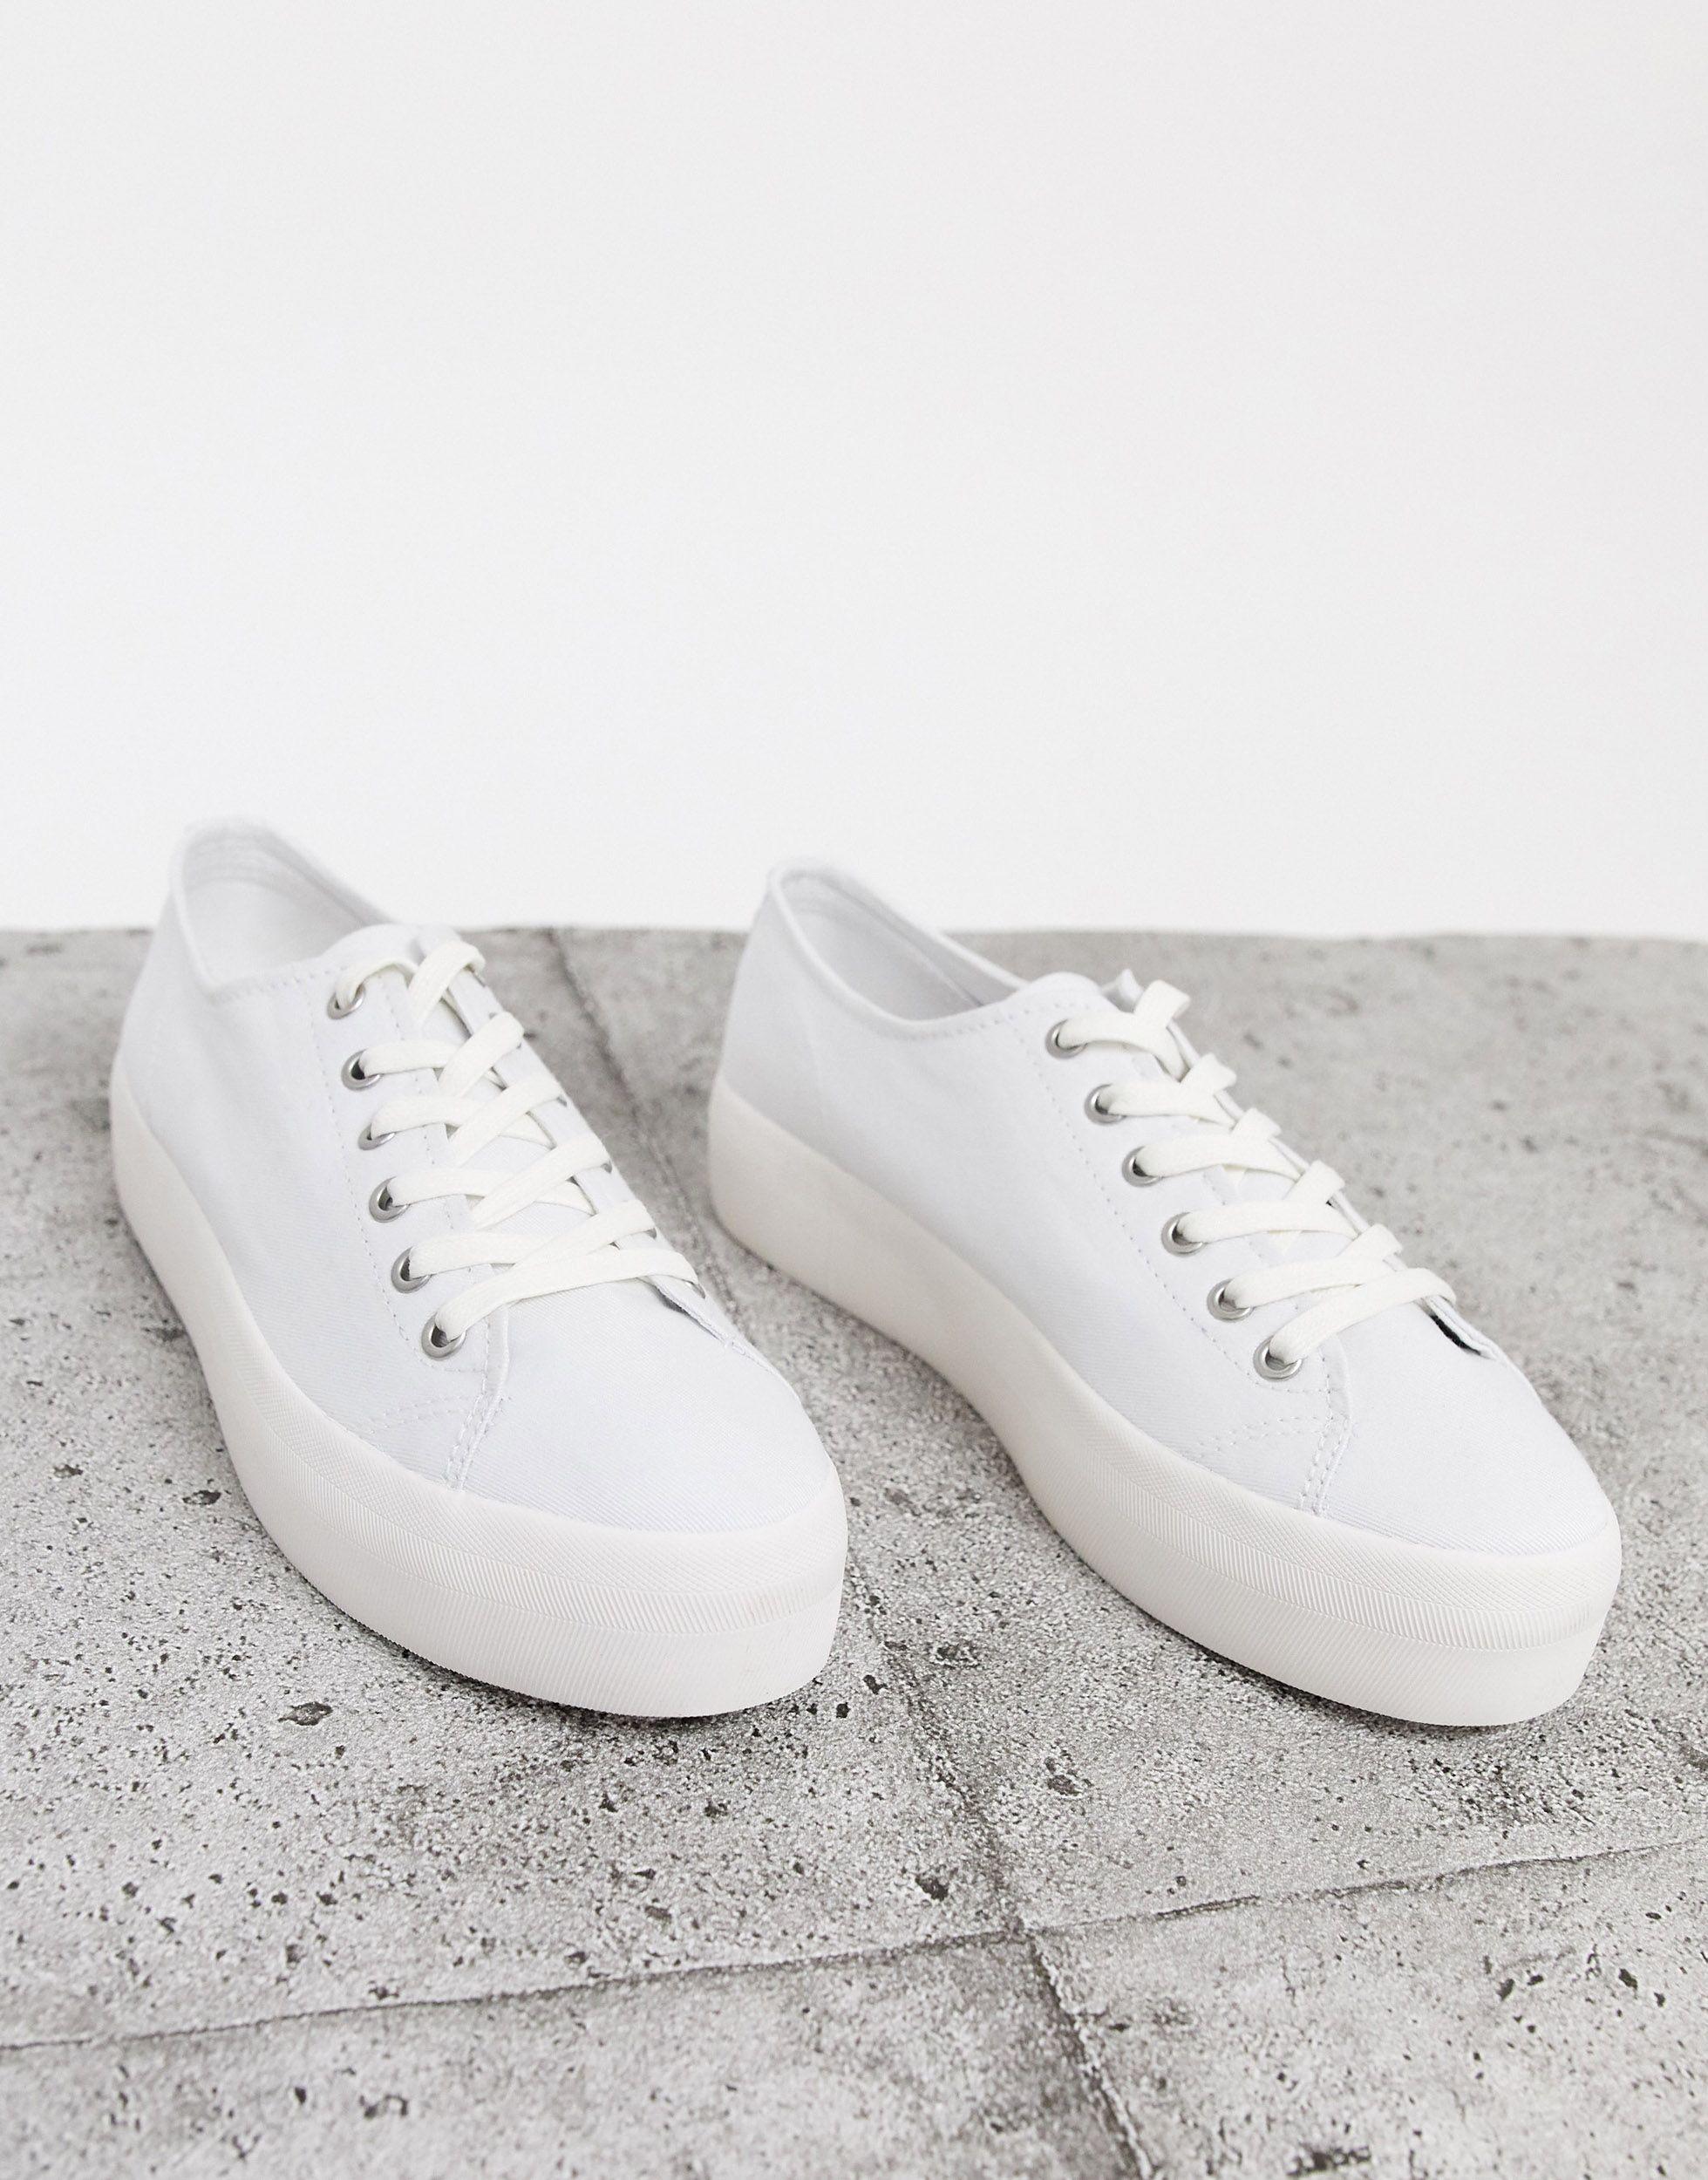 Vagabond Shoemakers peggy Flatform Sneaker in White | Lyst